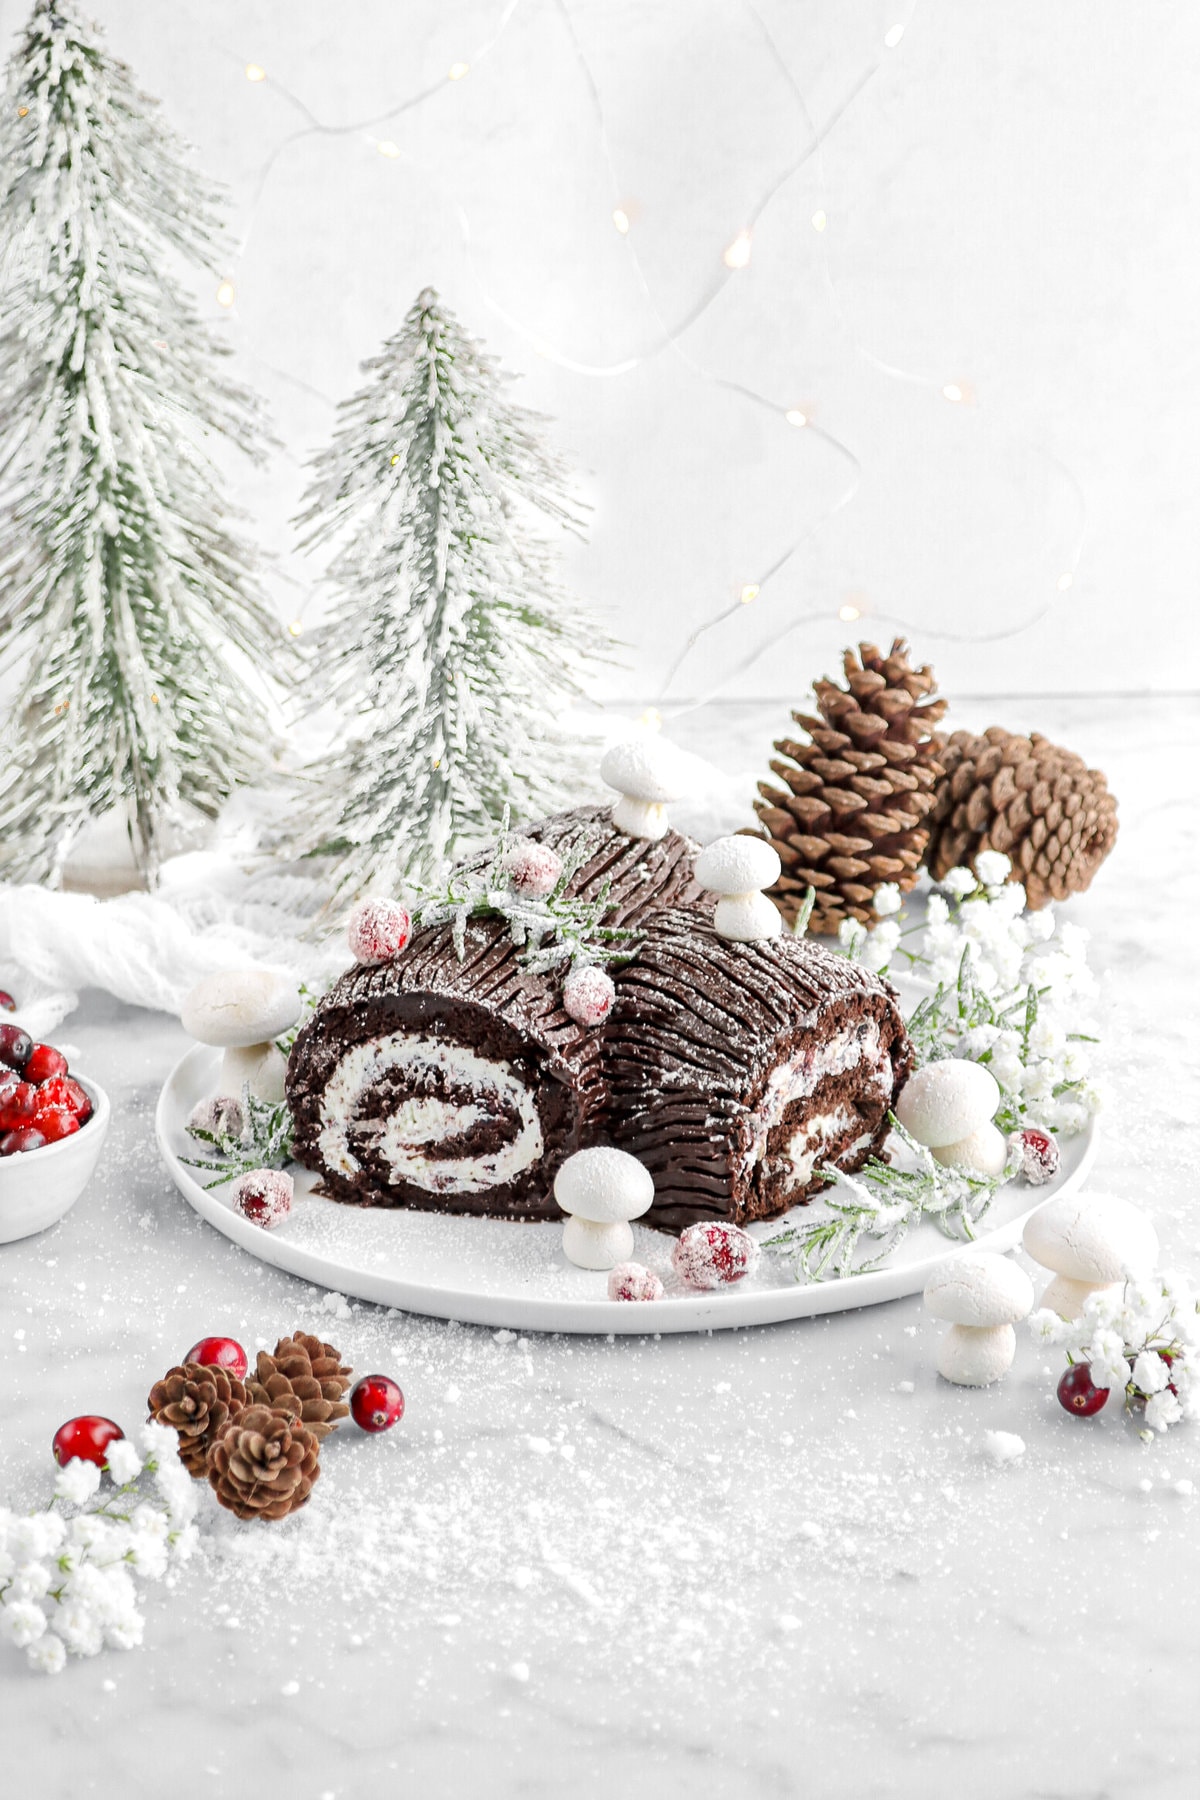 yule log on white plate with meringue mushroomed, sugared rosemary, cranberries, and white flowers around on marble surface with two mini trees behind and fairy lights.